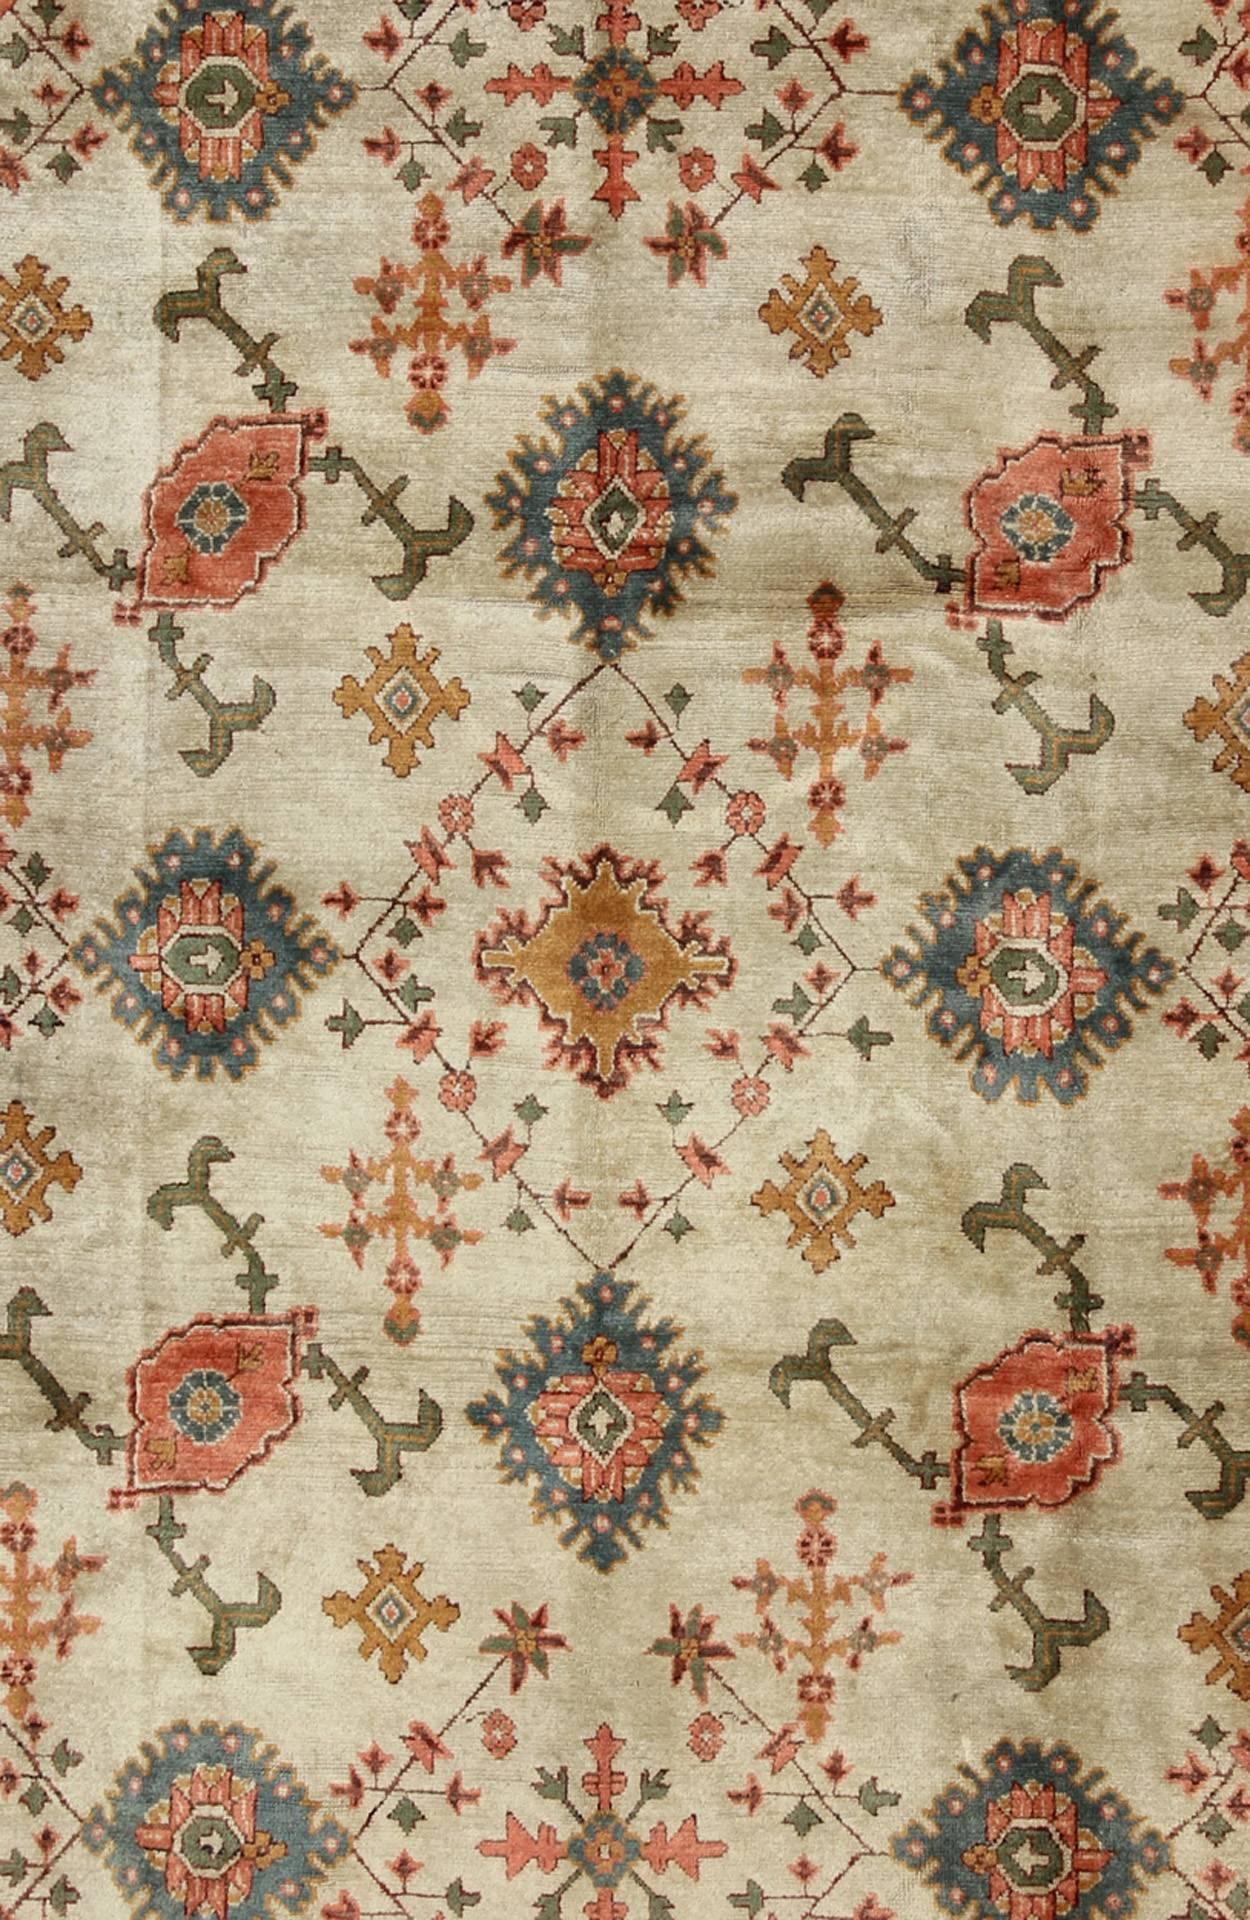 Hand-Knotted Antique Turkish Oushak Rug With All Over Design in Teal, Cream & Coral